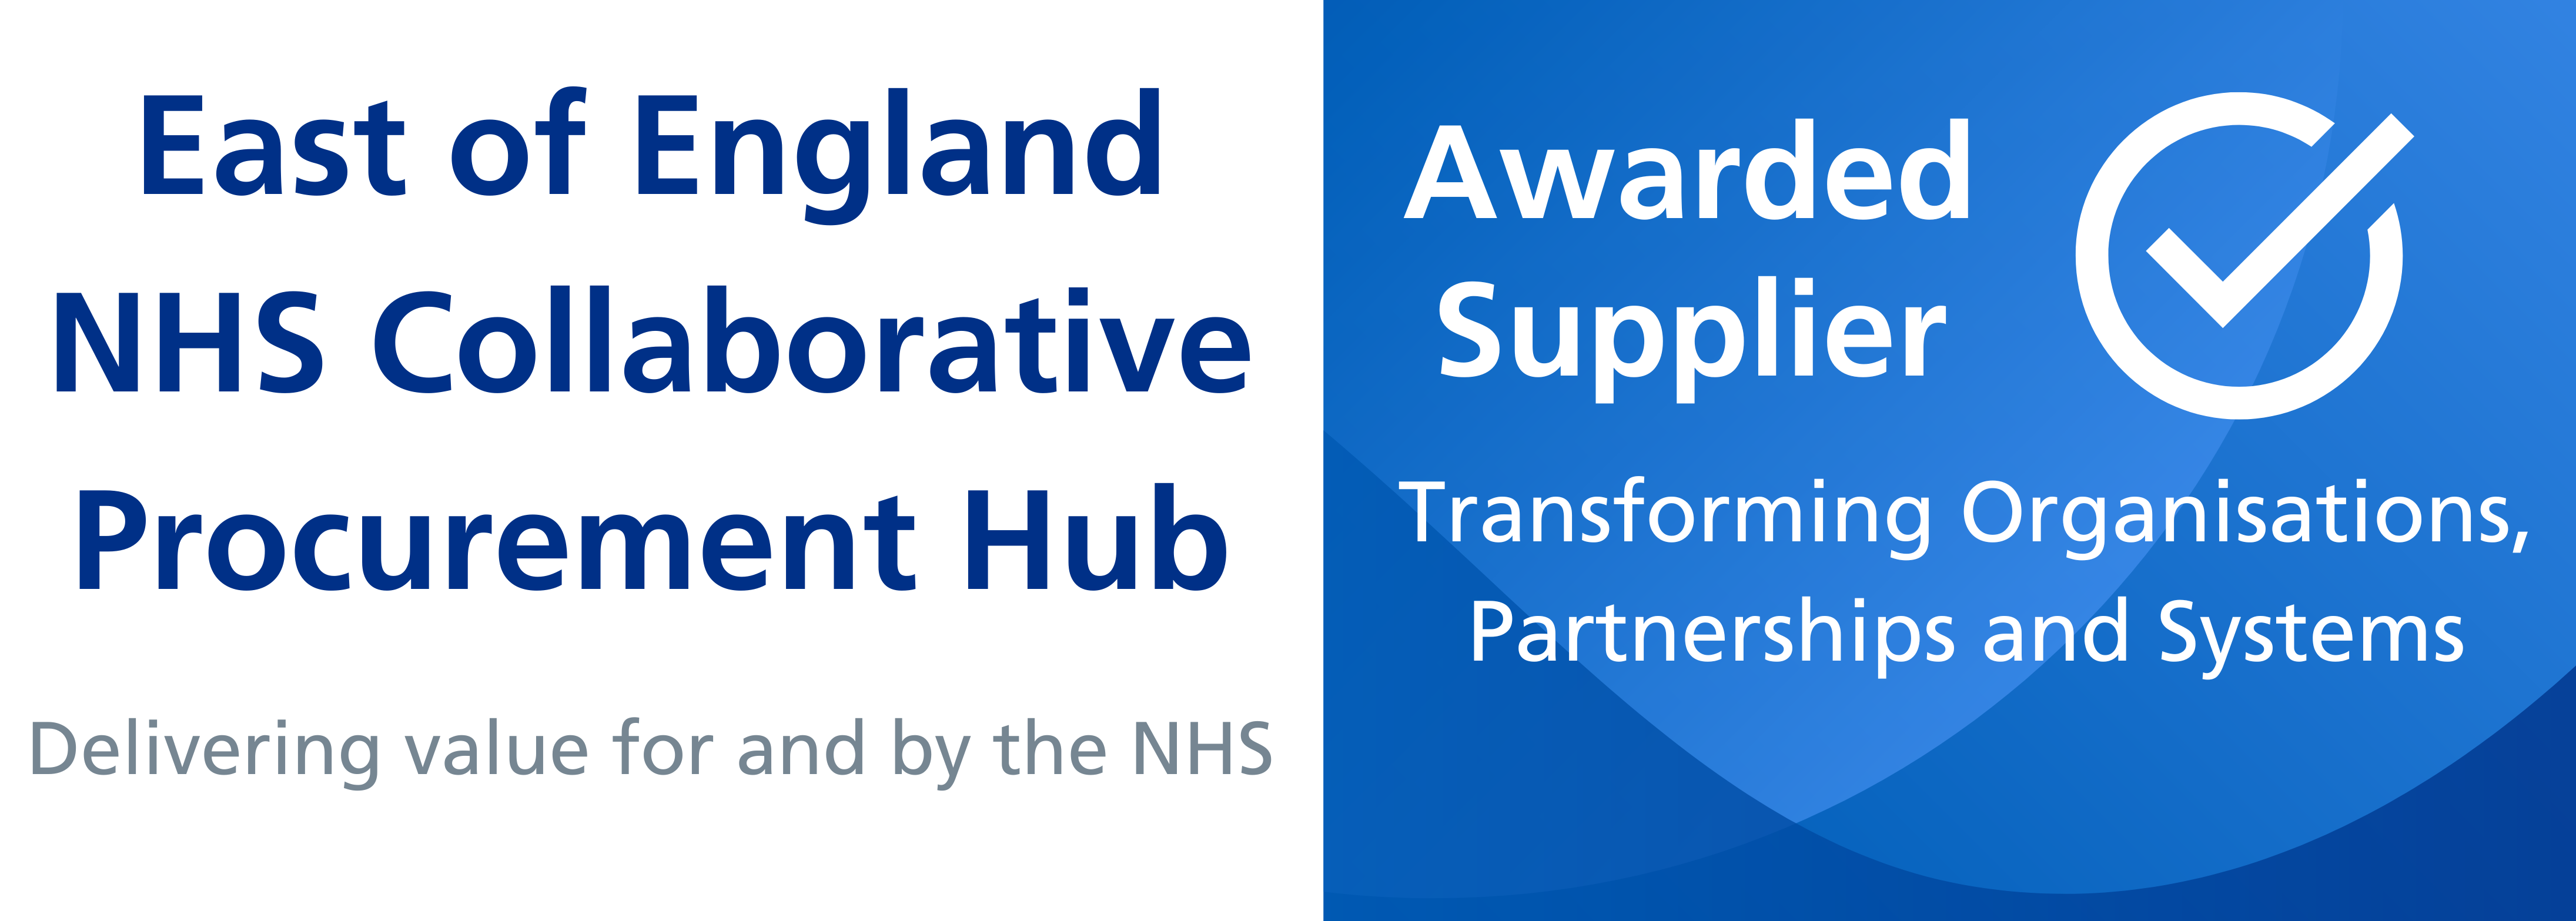 image for the East of England NHS Collaborative Procurement Hub accreditation